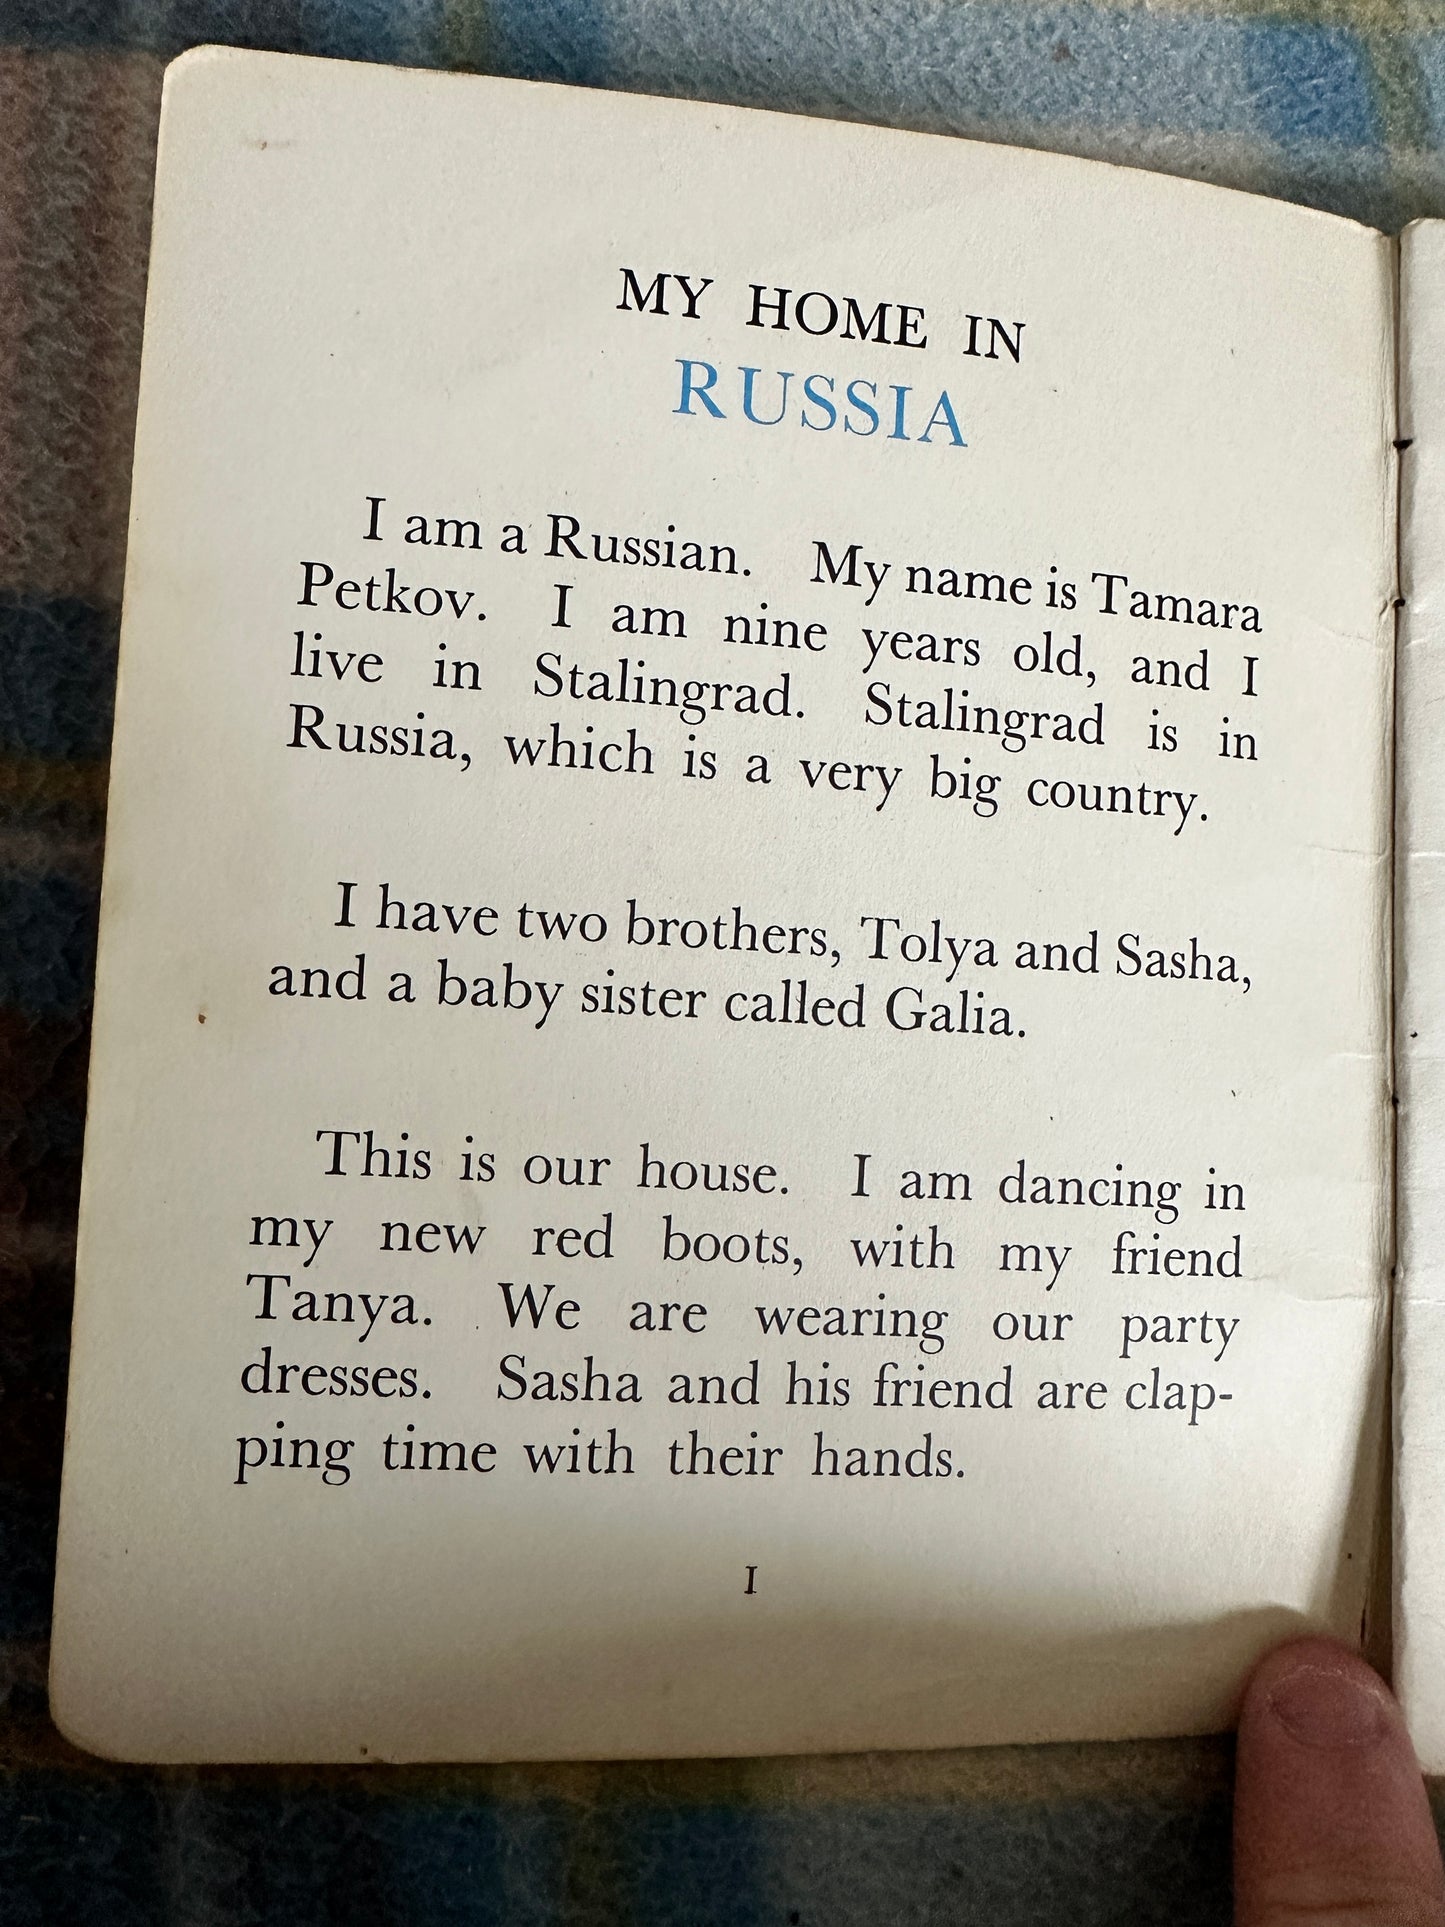 1959*1st* My Home In Russia (15)- Isabel Crombie(Longmans)